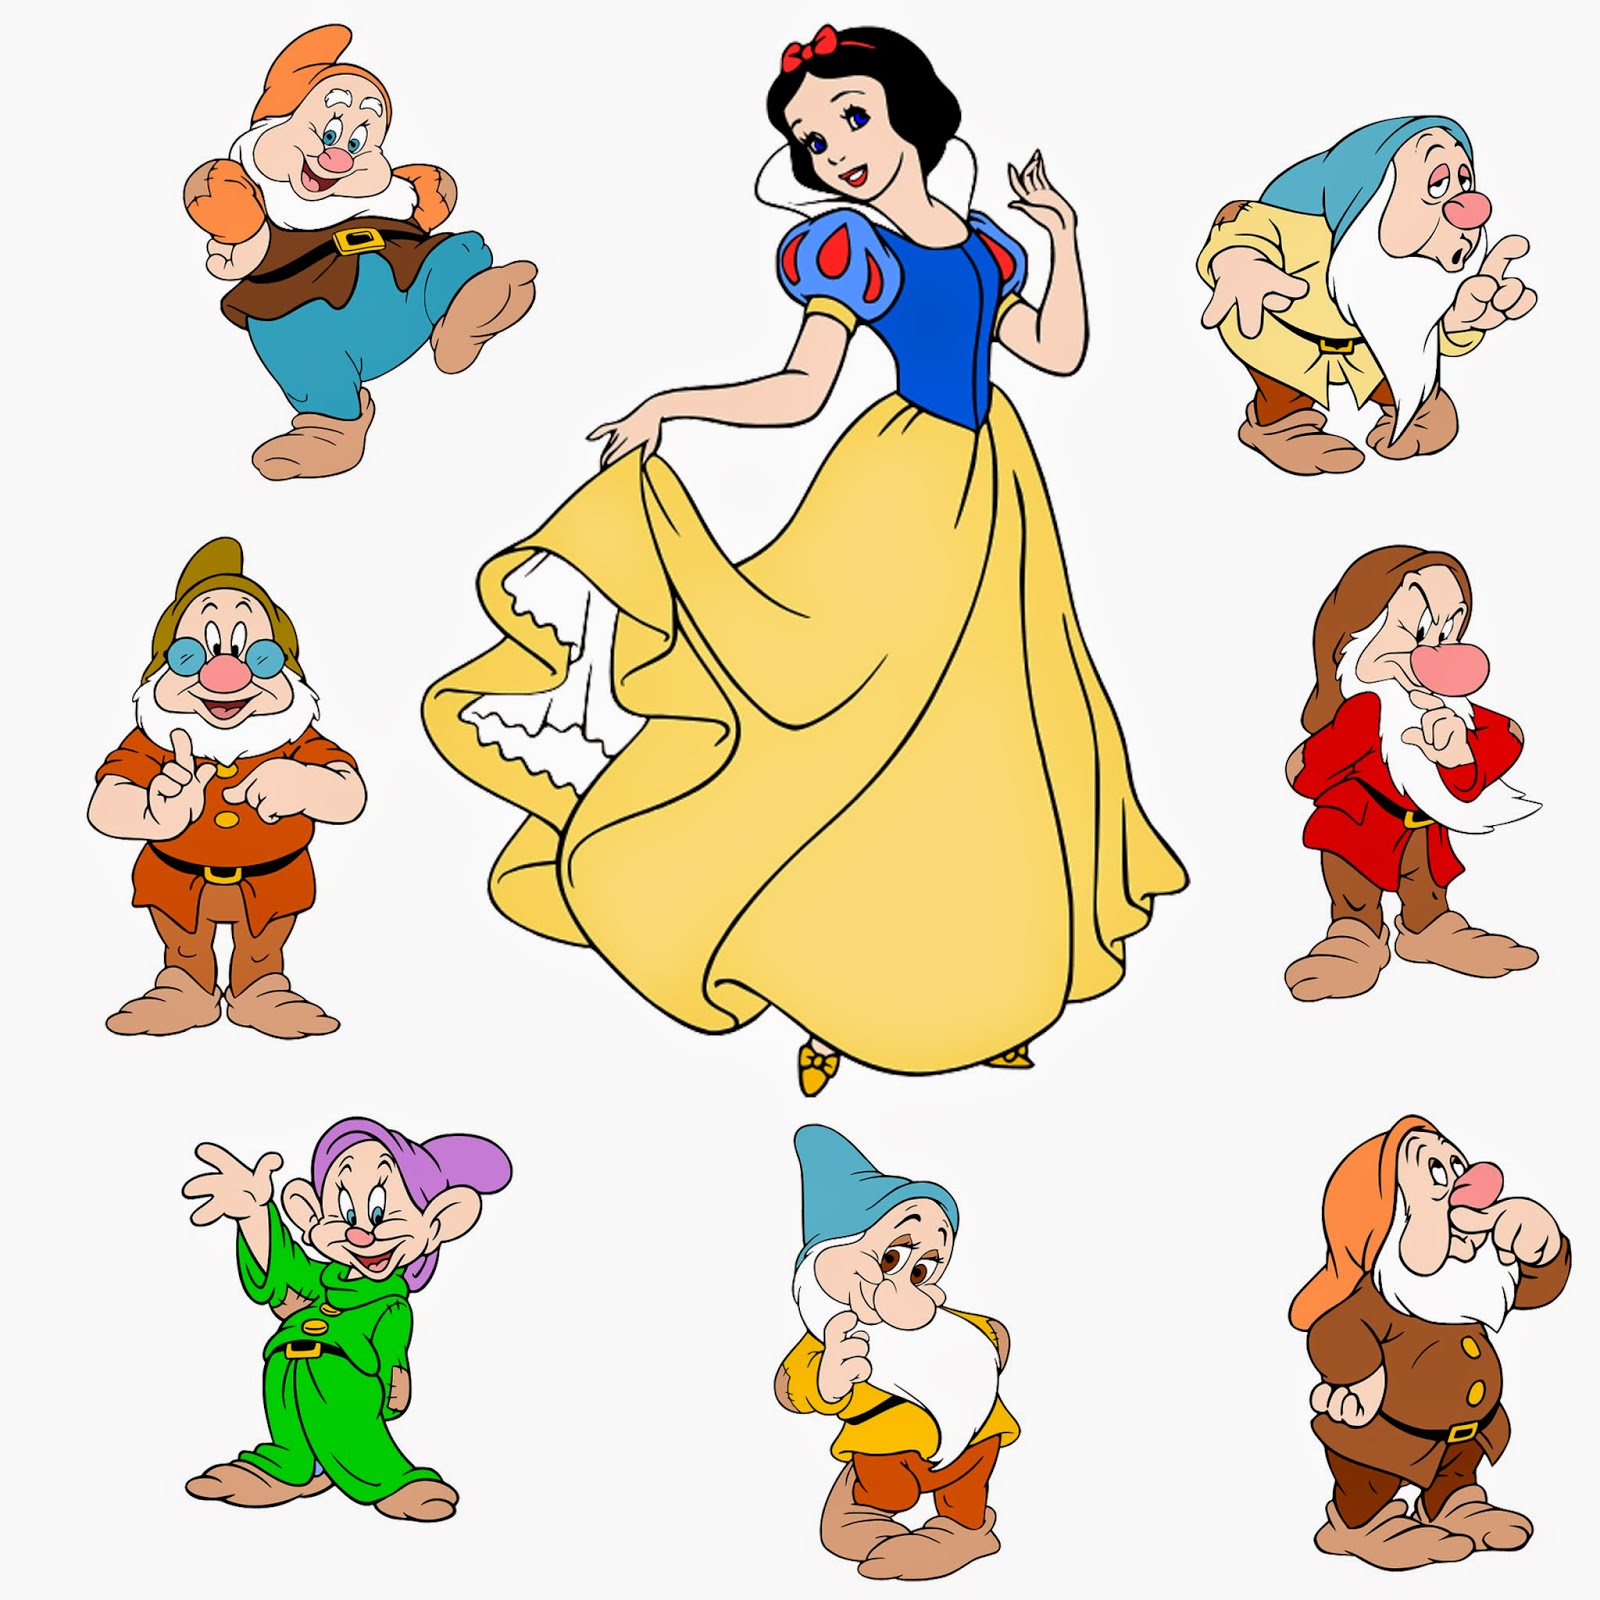 Snow White And The Seven Dwarfs Clipart at GetDrawings.com.